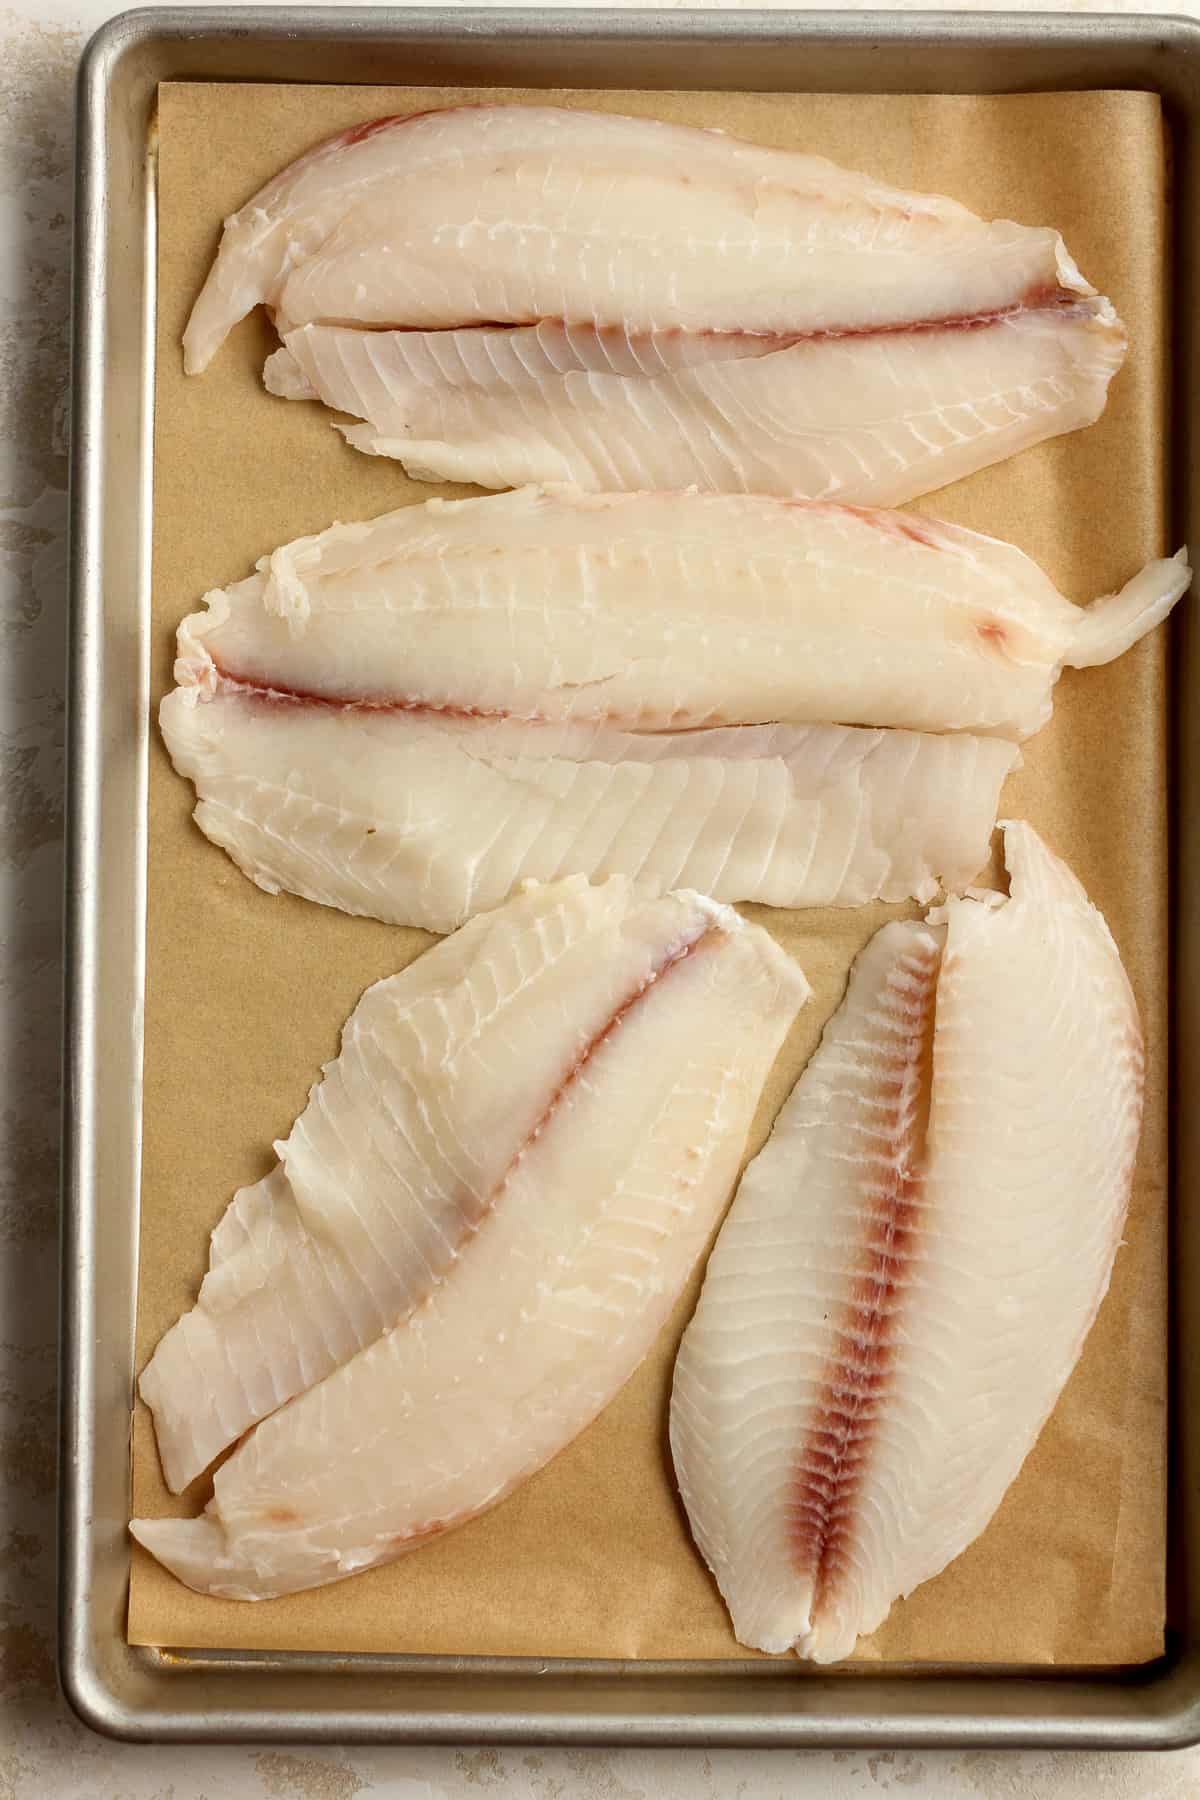 Four large pieces of raw tilapia on a pan.